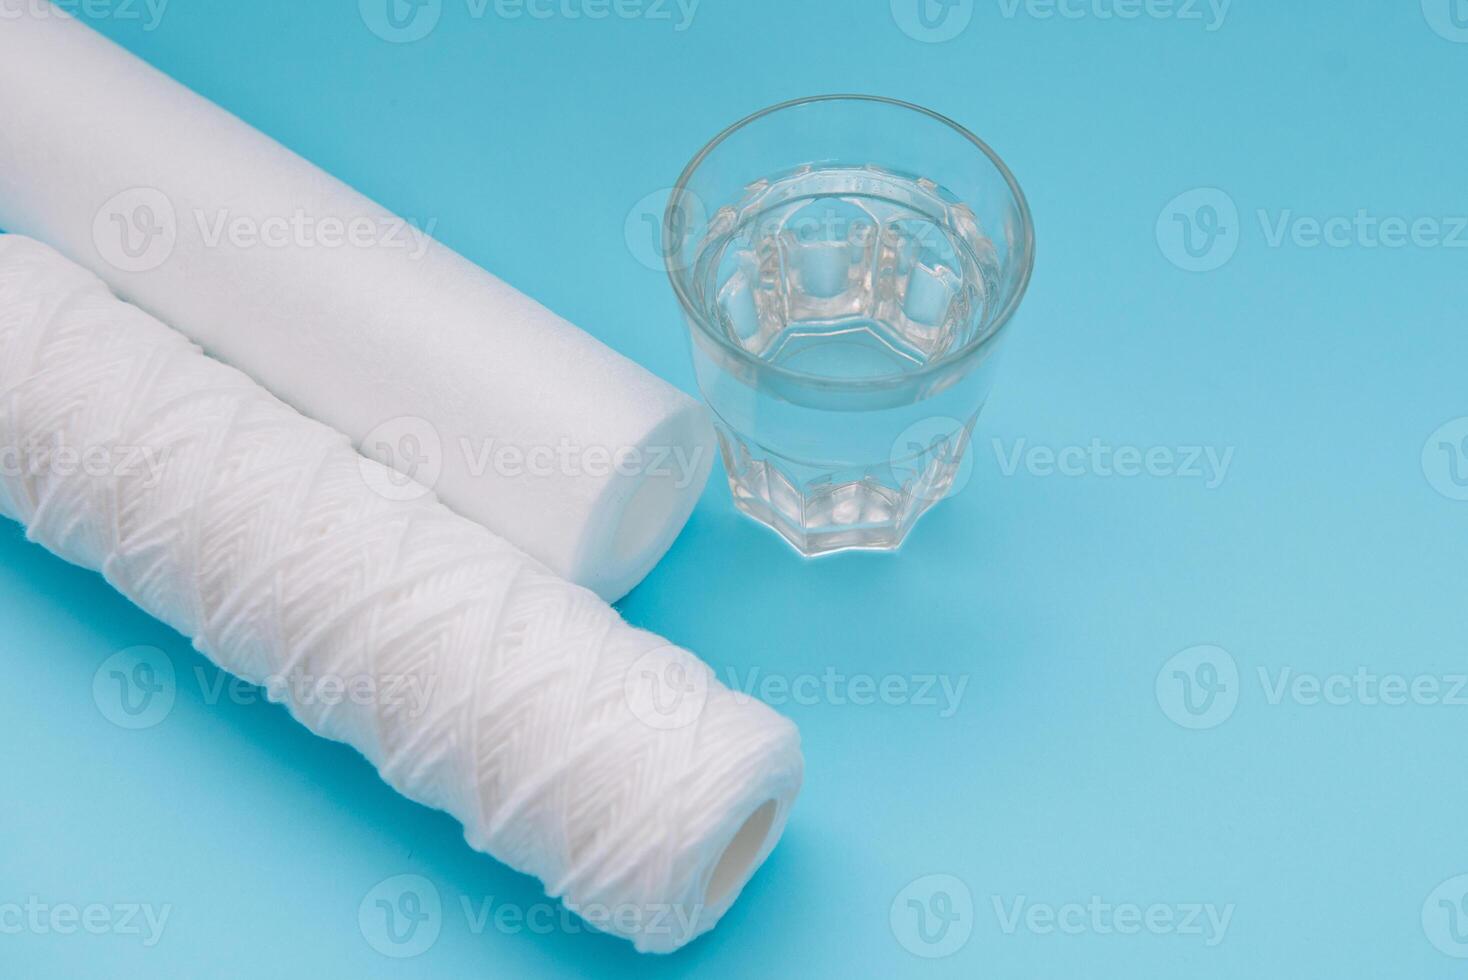 Water filters. Carbon cartridges and a glass with water on a blue background. Household filtration system photo